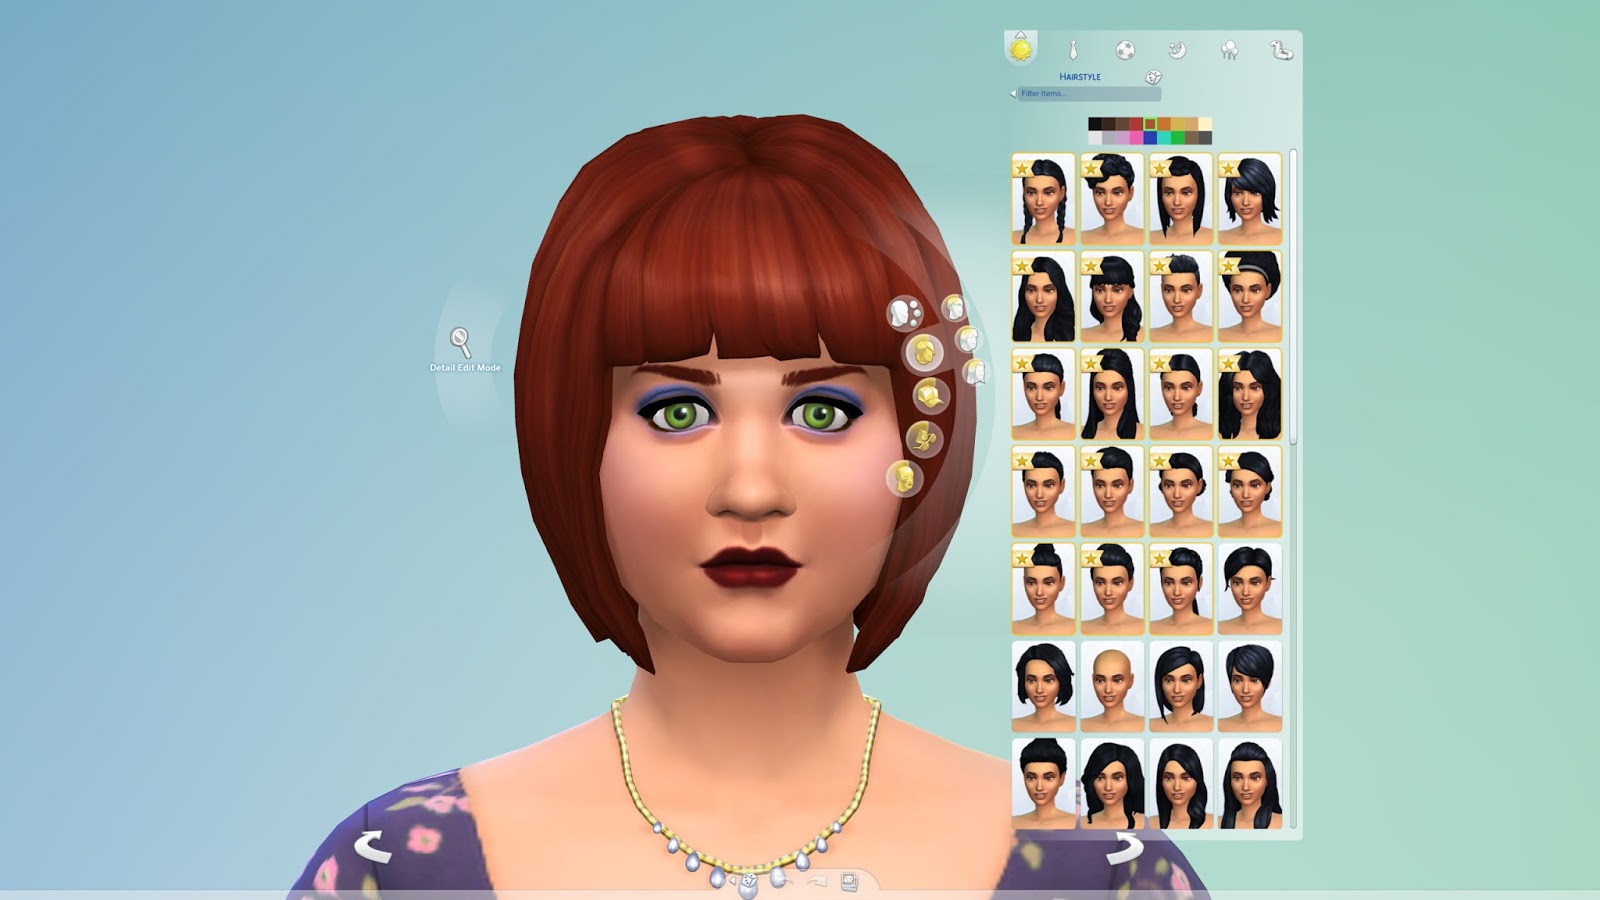 My Sims 4 Blog: More Columns in CAS v1.1 by weerbesu